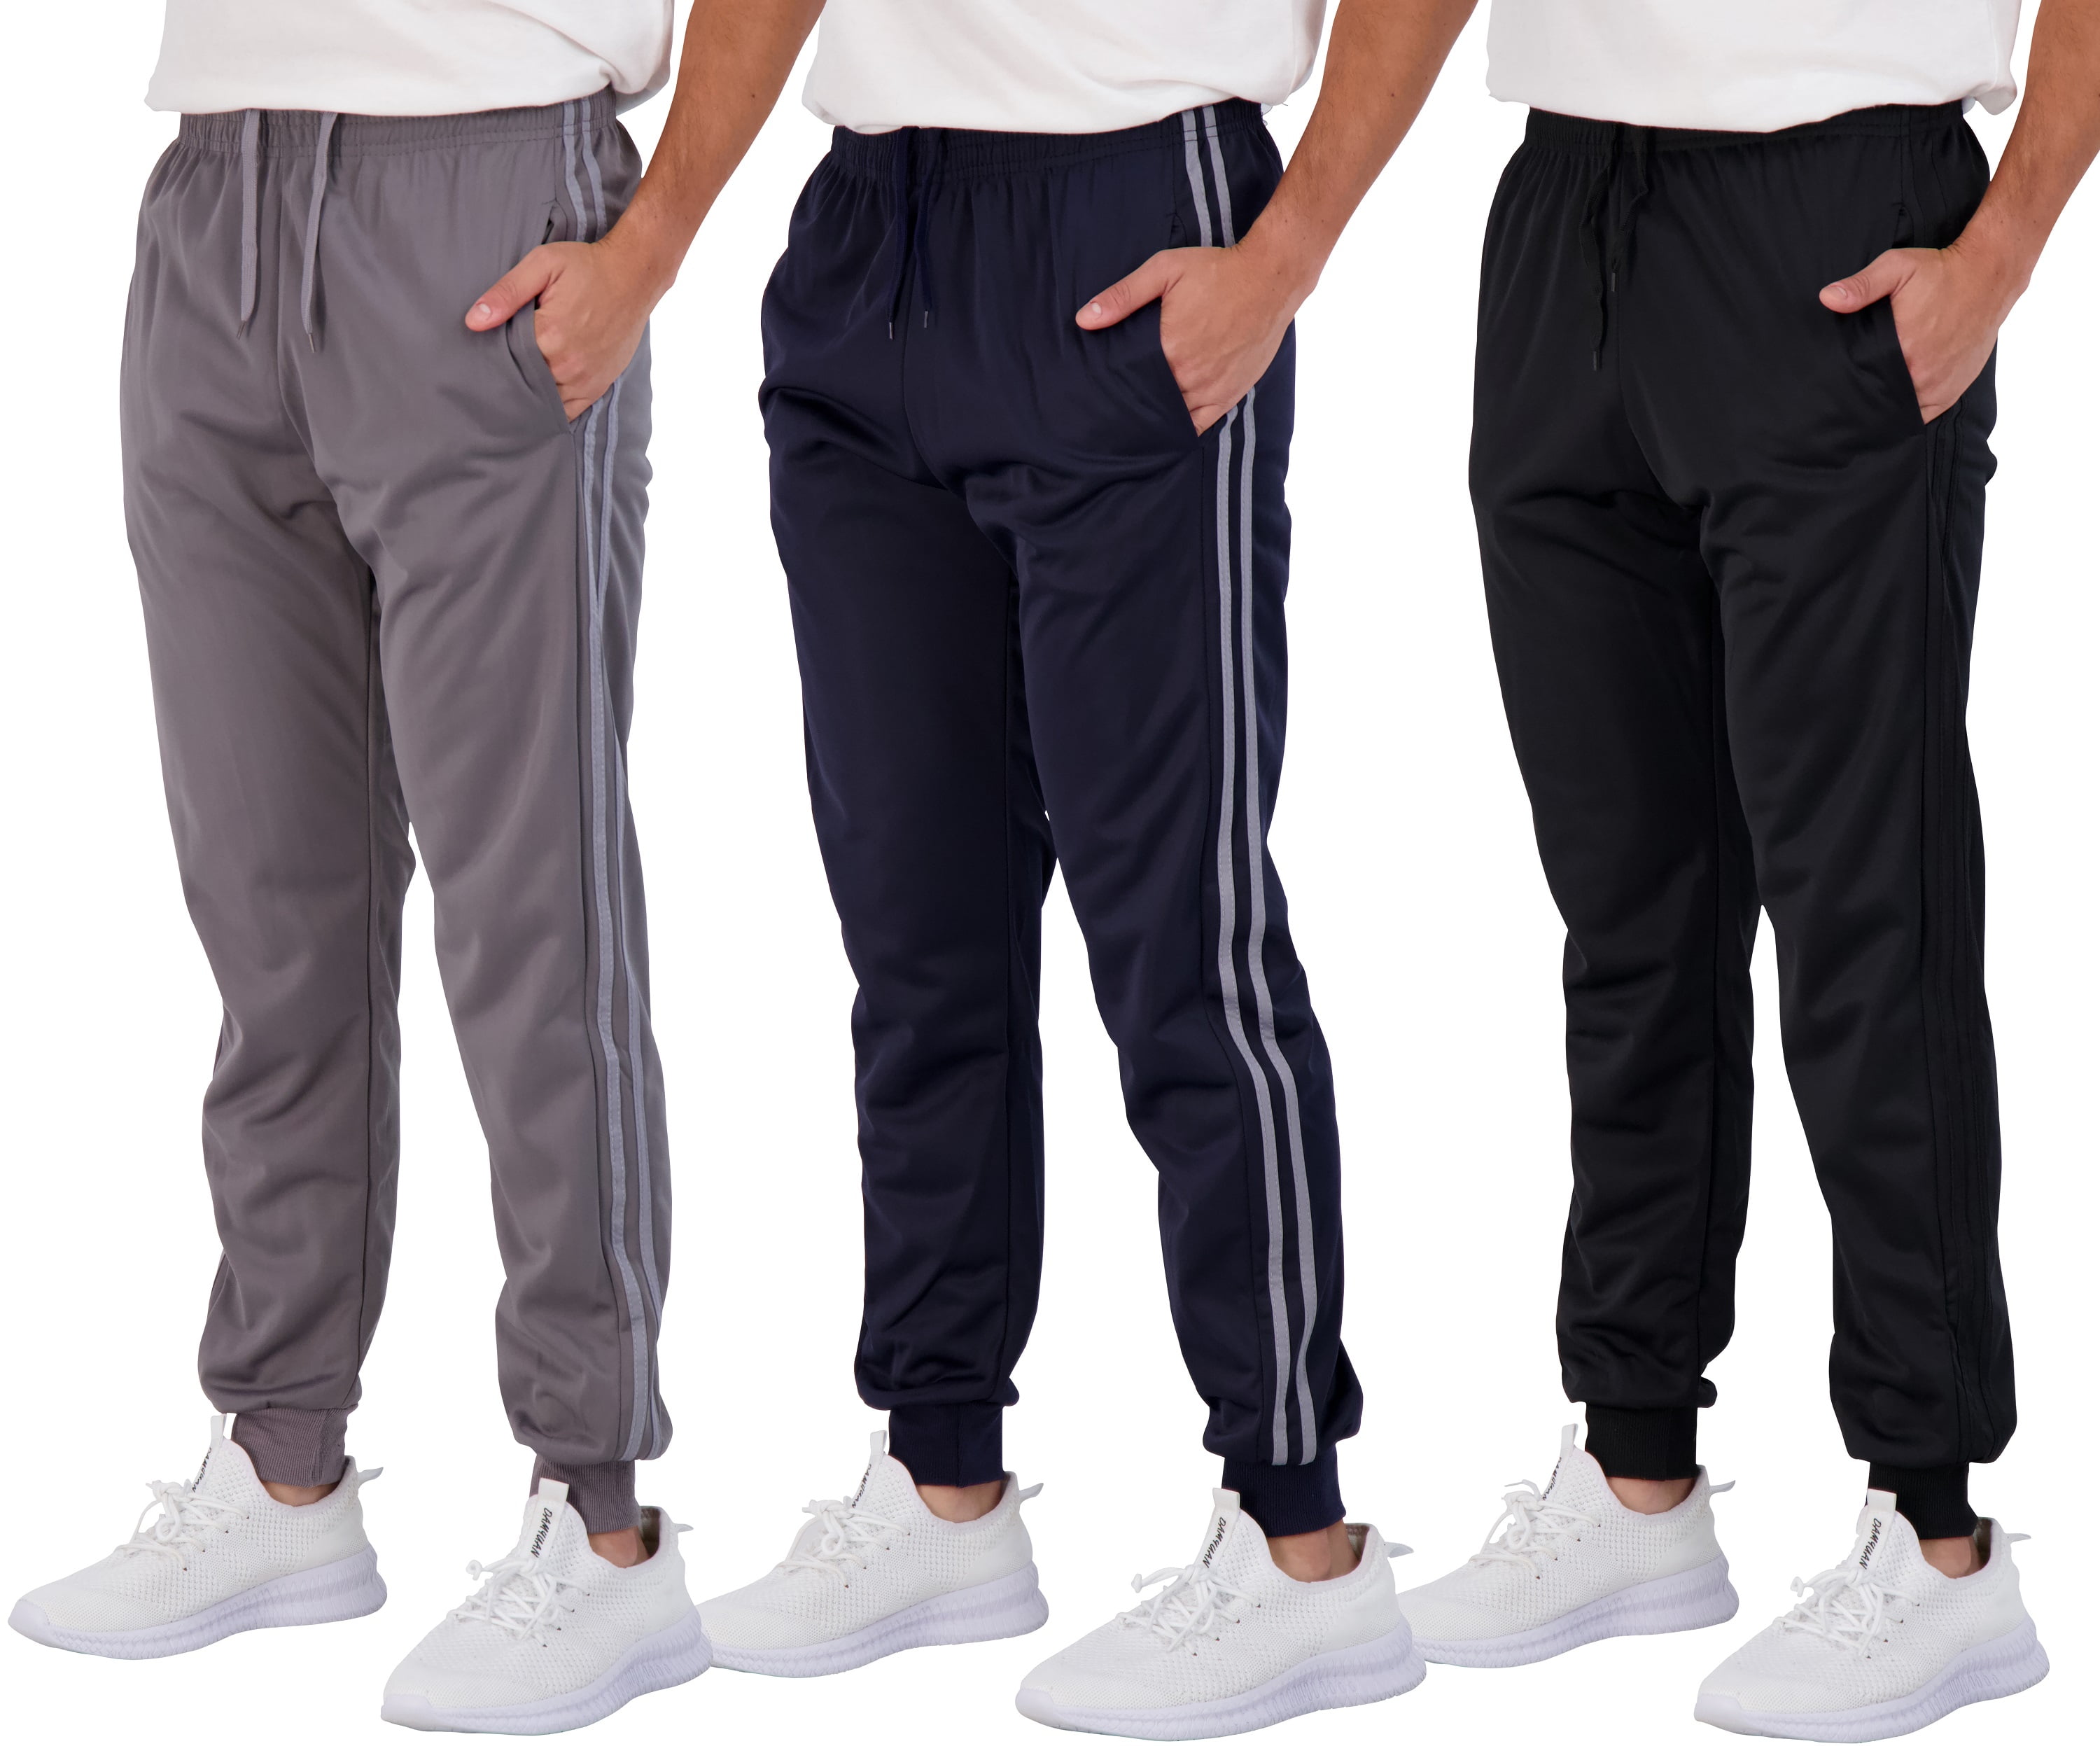 Real Essentials 3 Pack Men's Active Athletic Casual Jogger Sweatpants with Pockets 